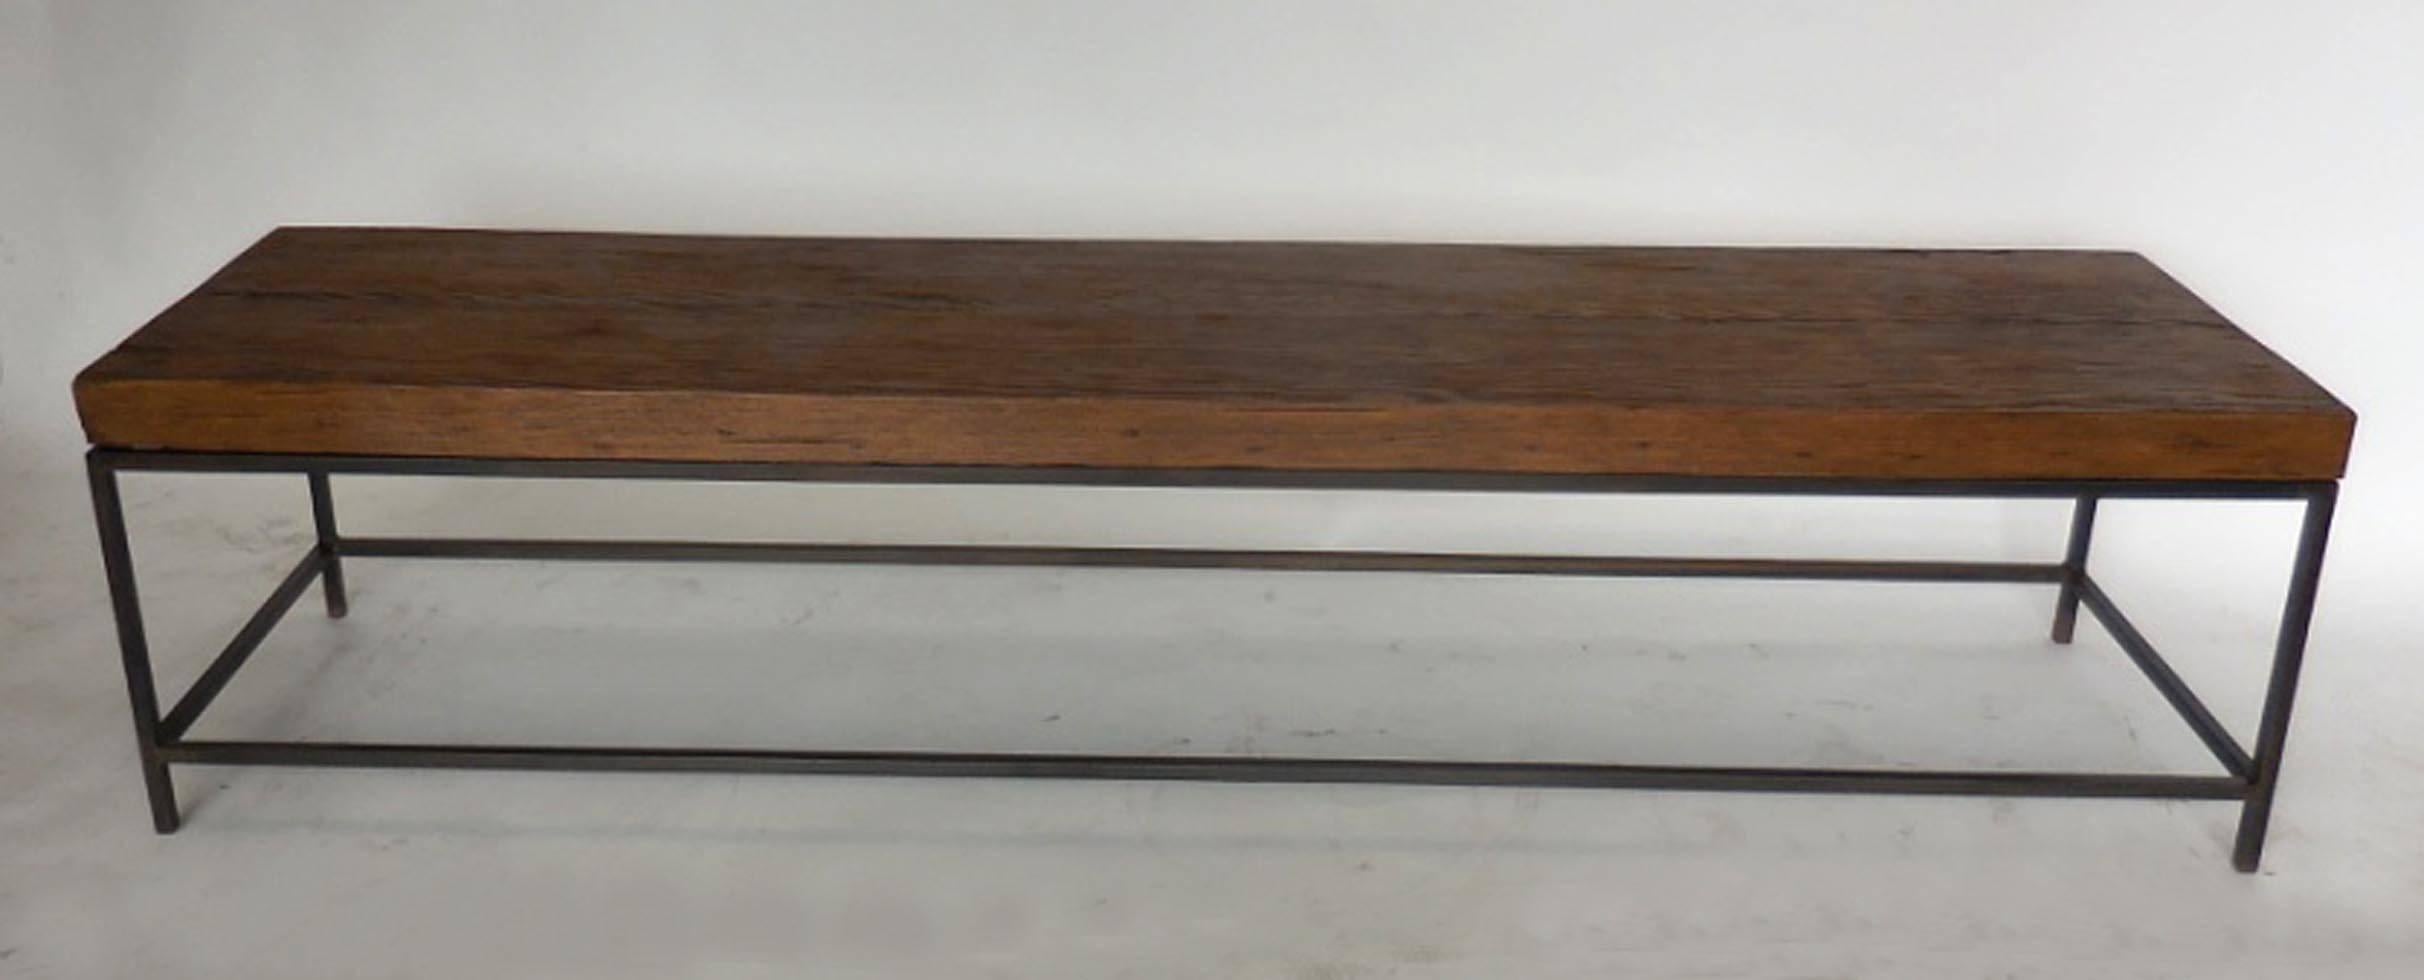 Rustic, yet modern bench or coffee table made from reclaimed wood atop and a hand-forged iron base. Can be made in any size in a variety of finishes. Made in Los Angeles by Dos Gallos Studio.